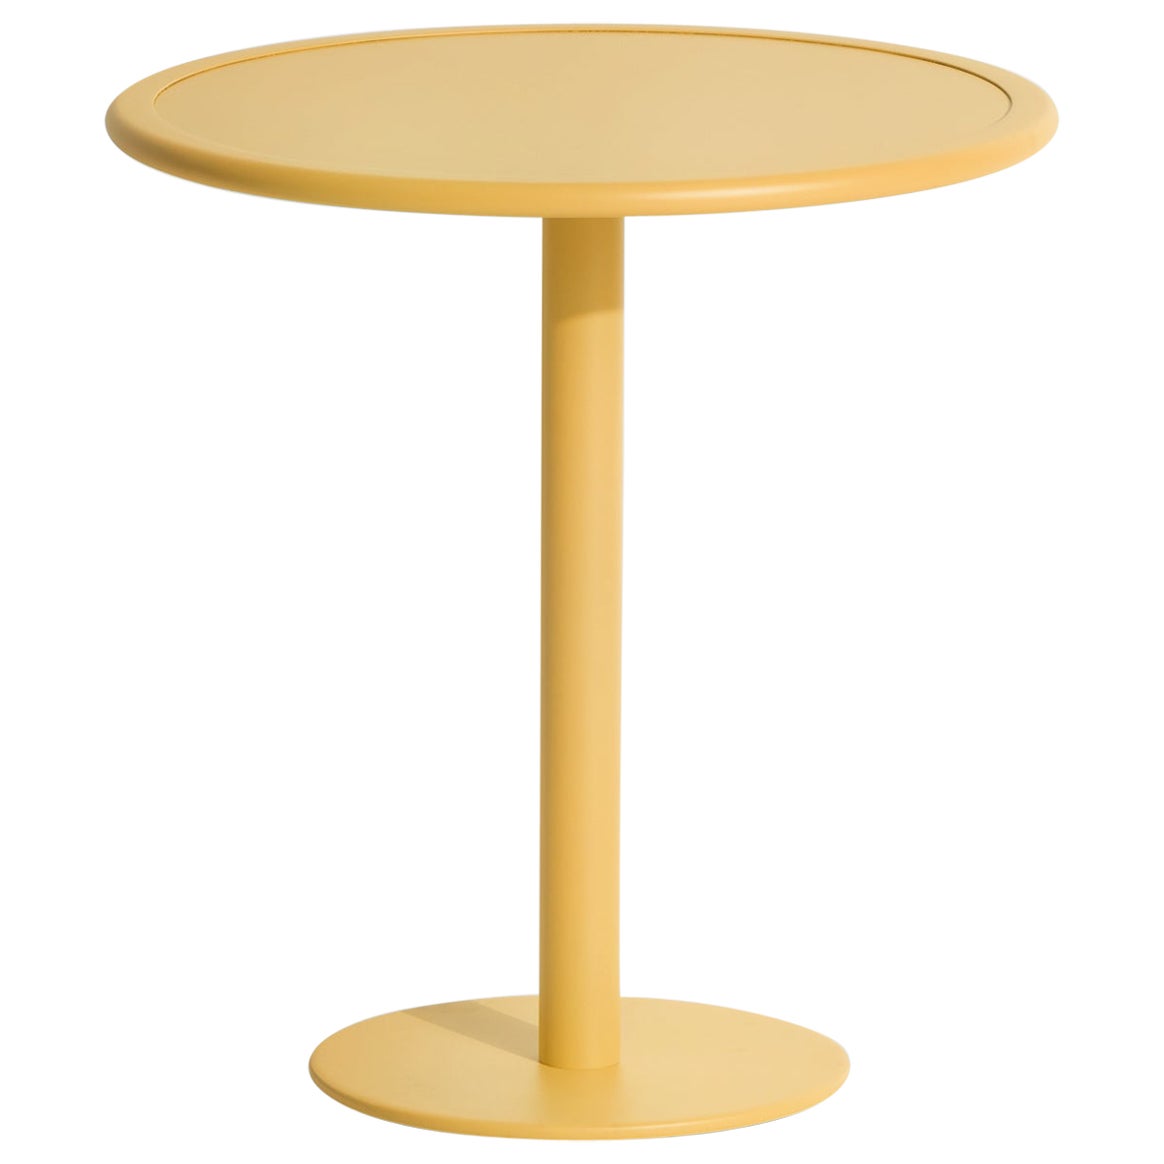 Petite Friture Week-End Bistro Round Dining Table in Saffron Aluminium, 2017 For Sale